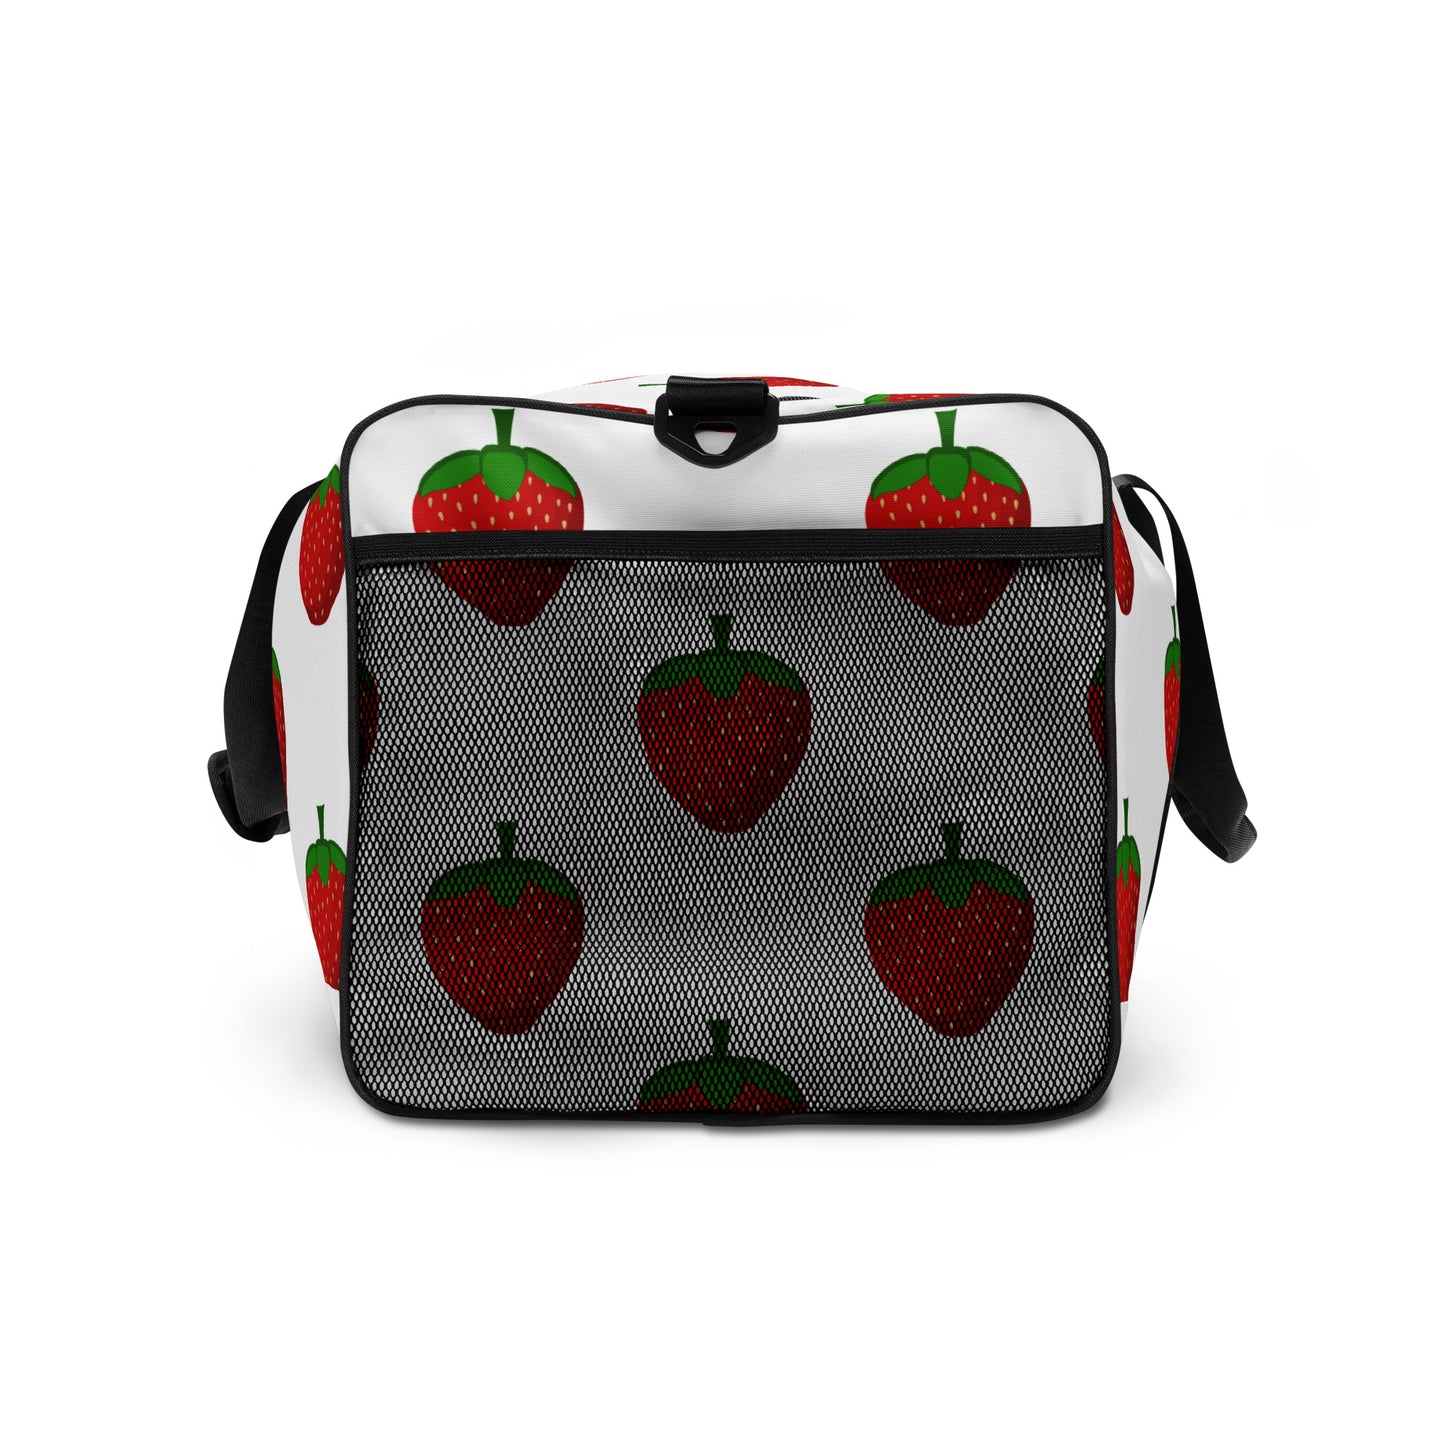 Strawberry Party - Inspired By Harry Styles - Sustainably Made  Duffle bag